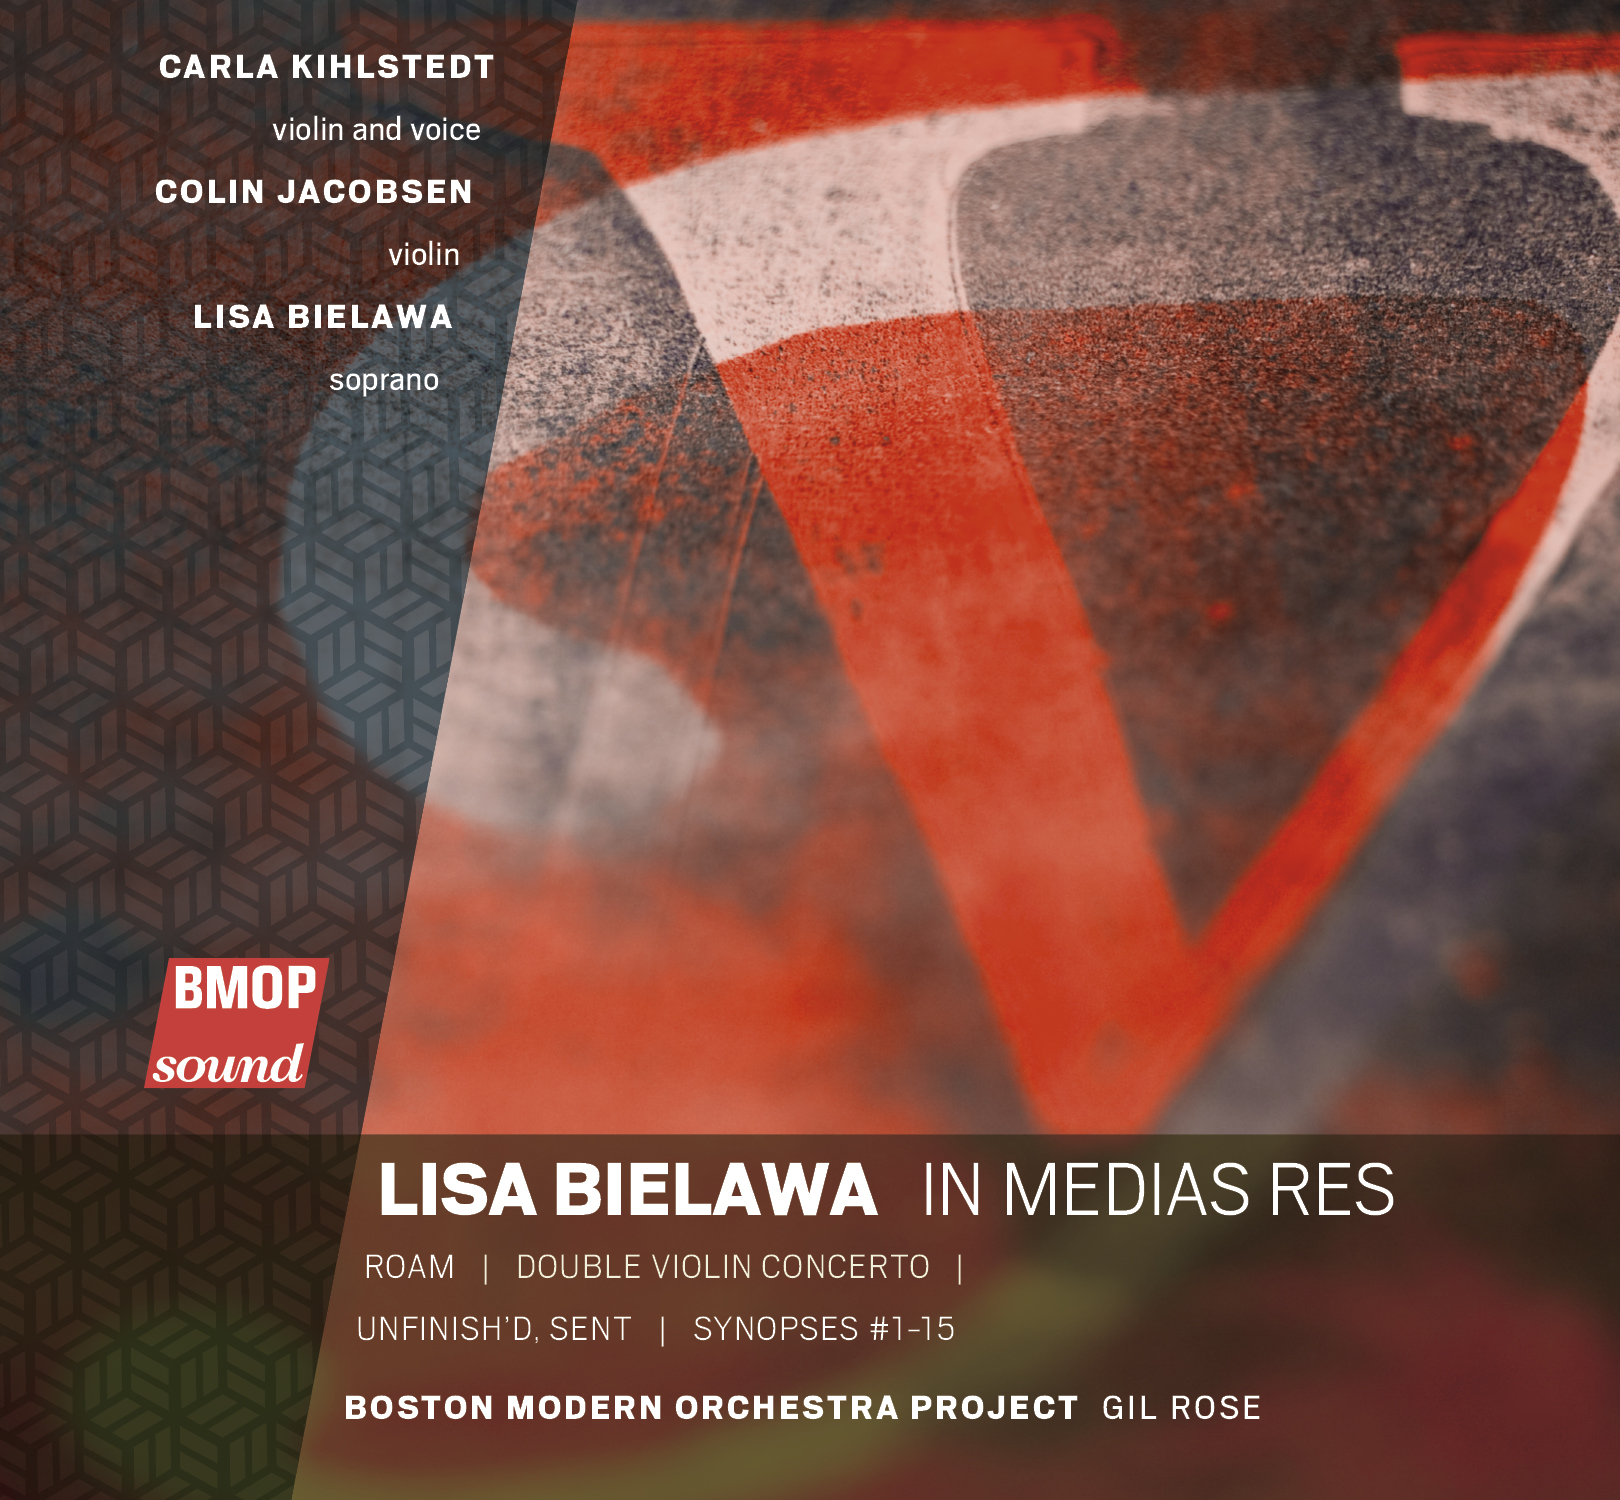 Art for Double Violin Concerto 2. Song by Lisa Bielawa by Carla Kihlstadt, violin and voice, Colin Jacobsen, violin